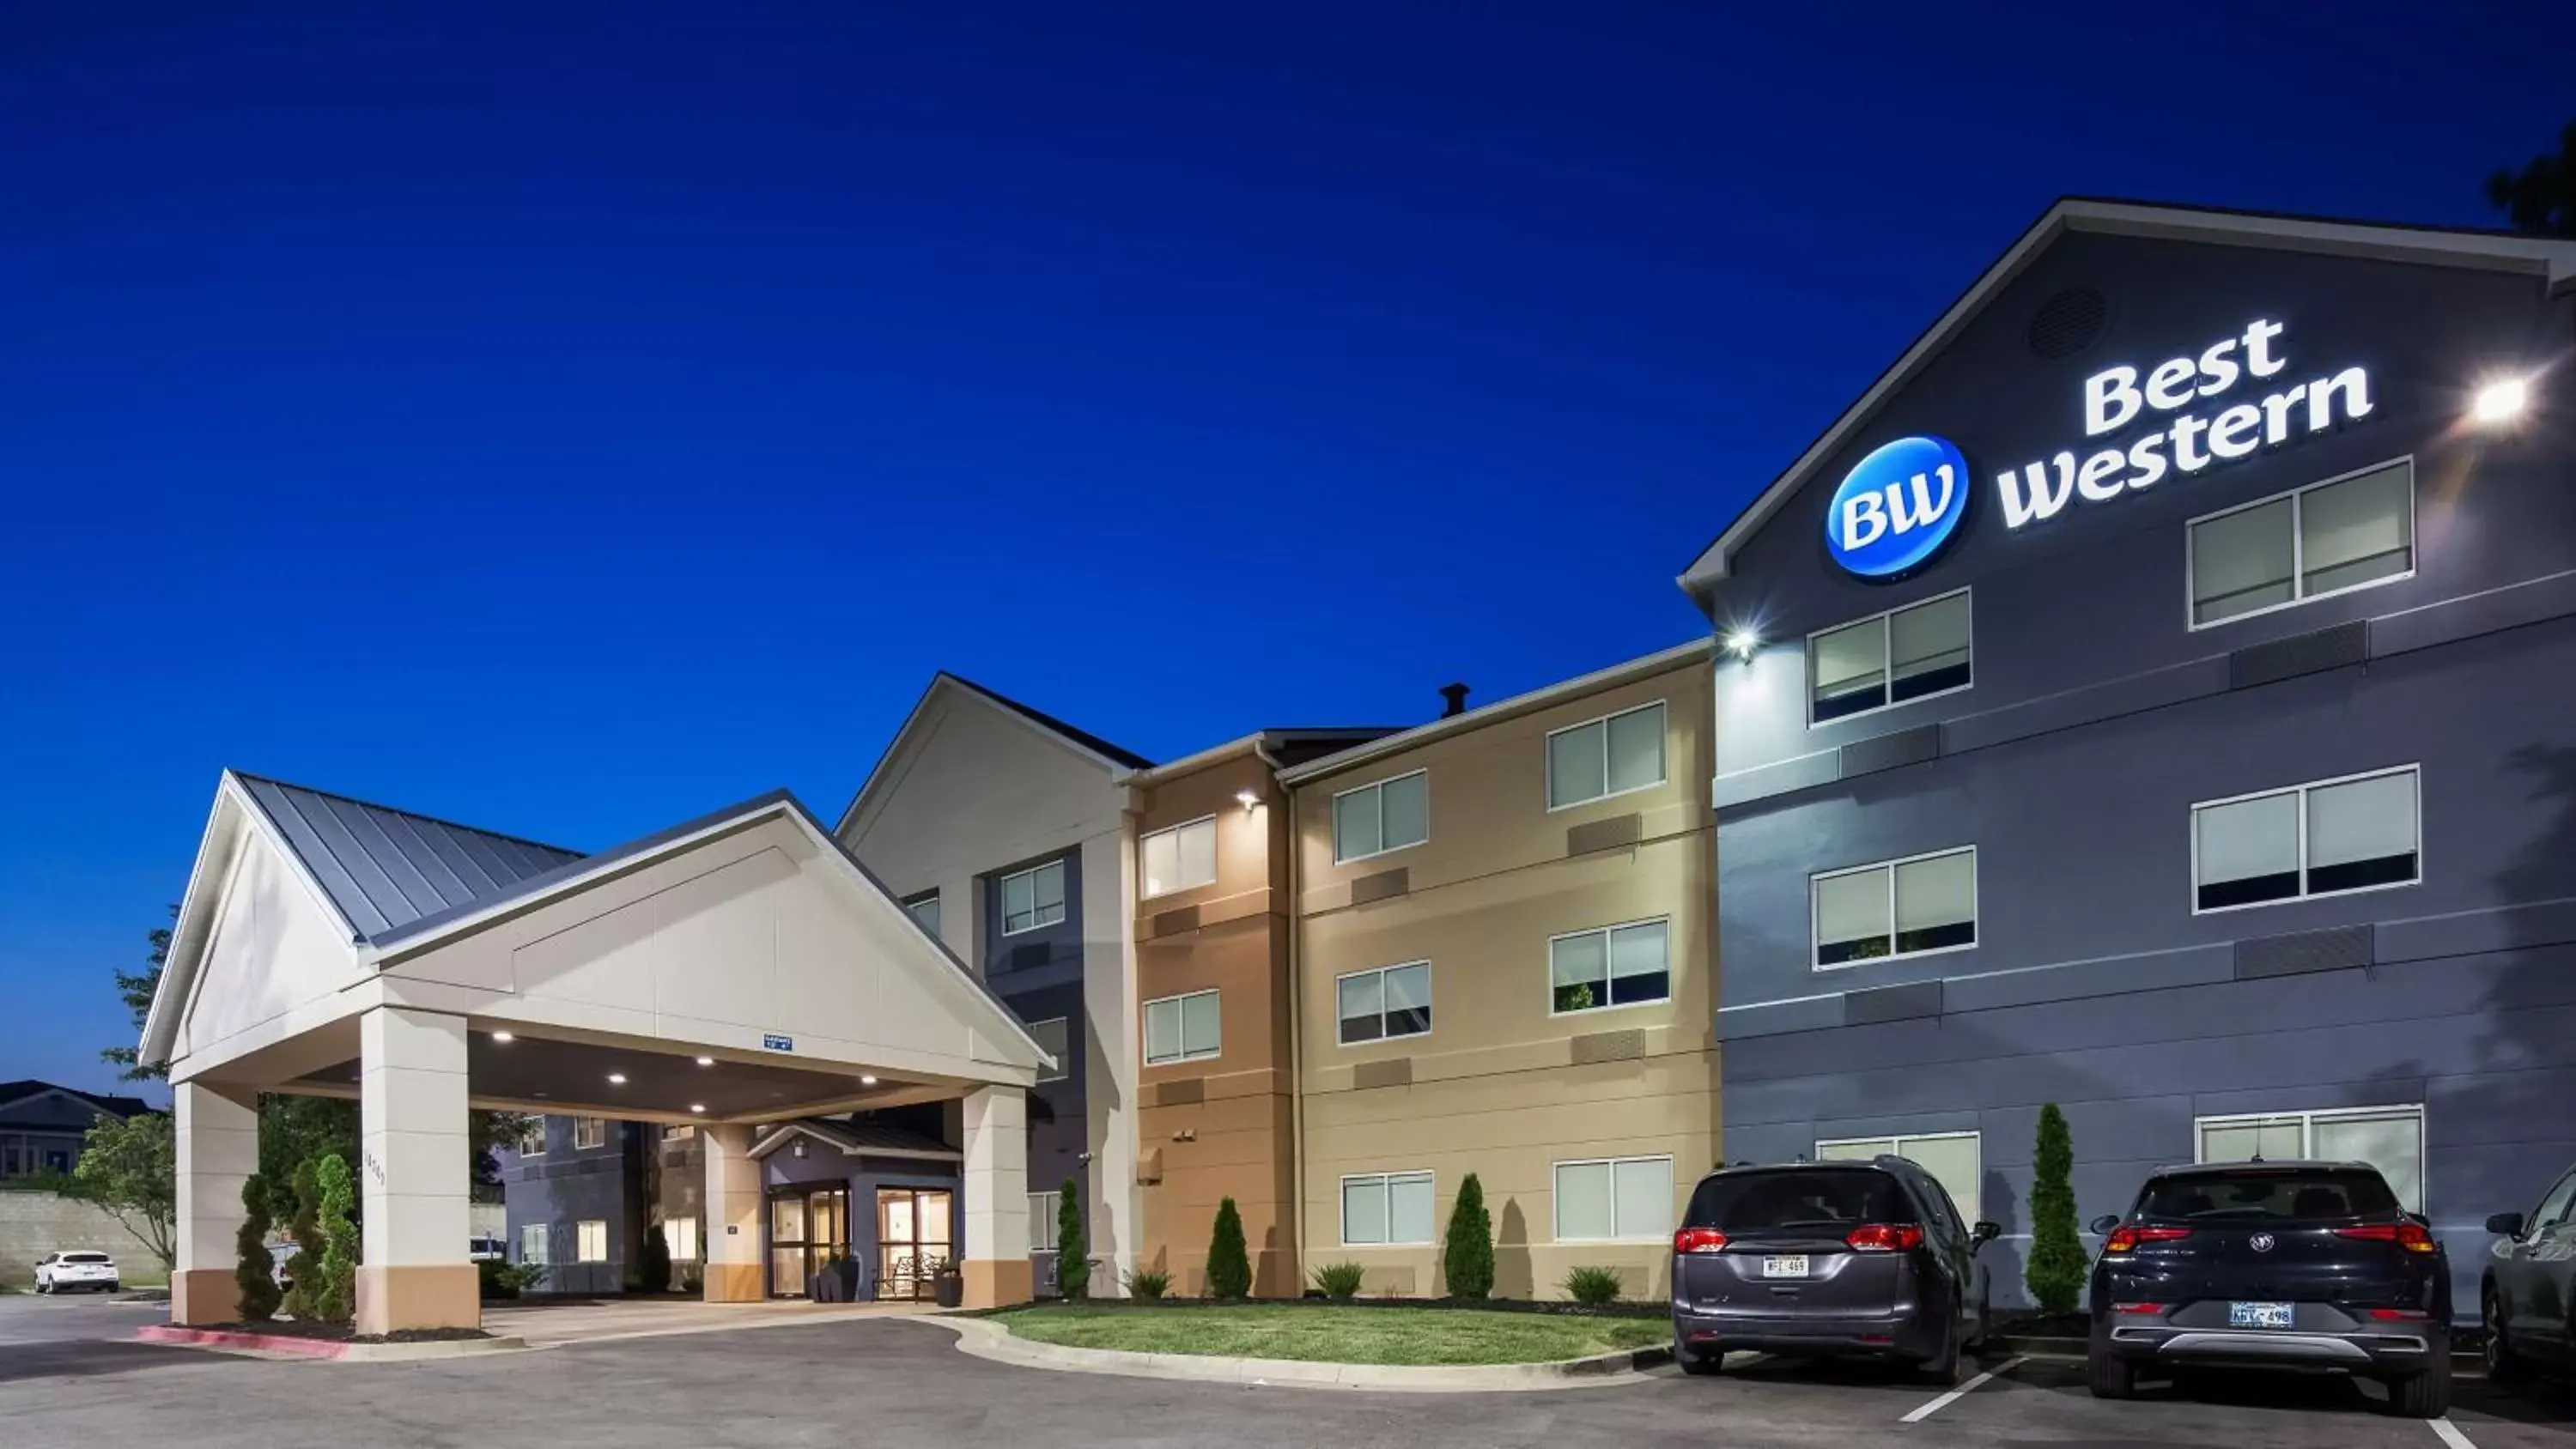 Property Building in Best Western Independence Kansas City